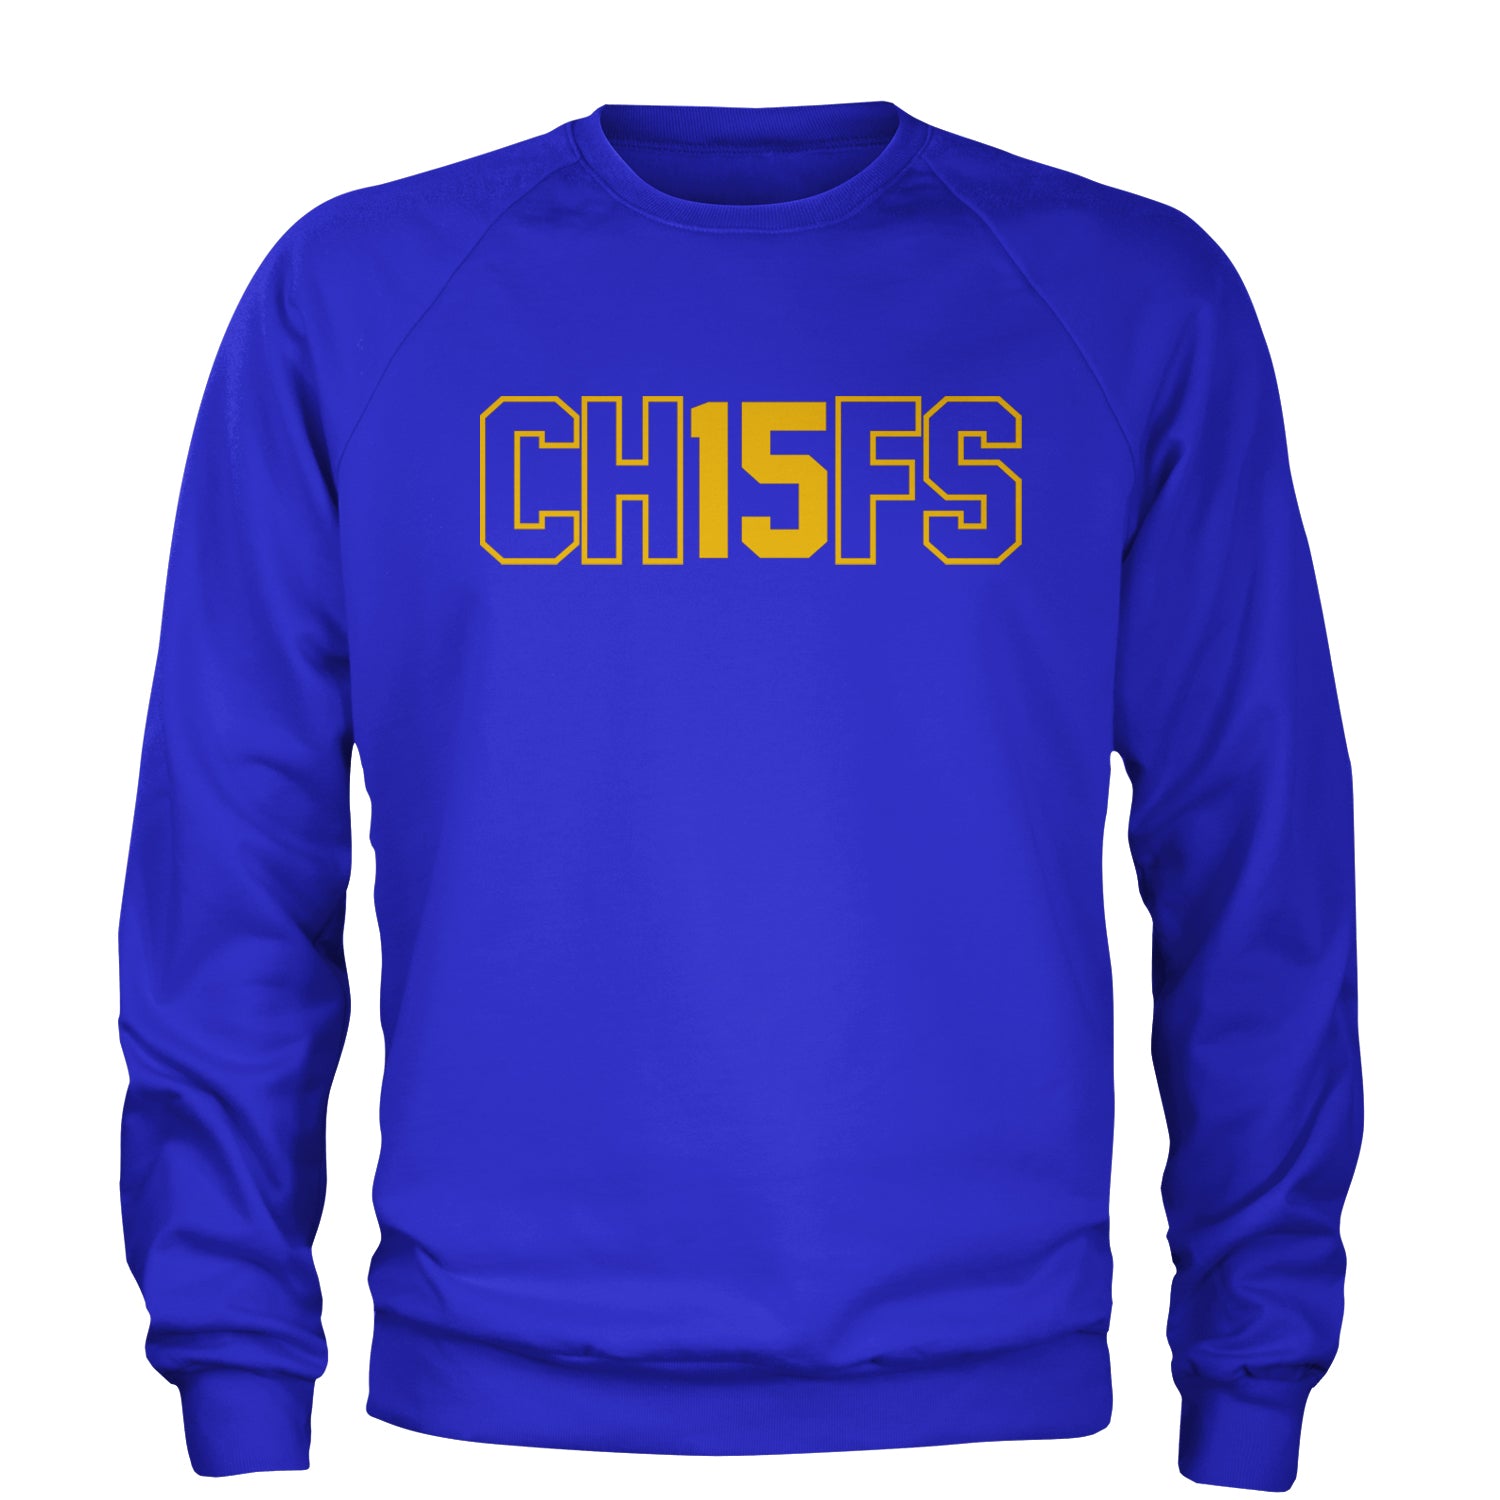 Ch15fs Chief 15 Shirt Adult Crewneck Sweatshirt ass, big, burrowhead, game, kelce, know, moutha, my, nd, patrick, role, shut, sports, your by Expression Tees